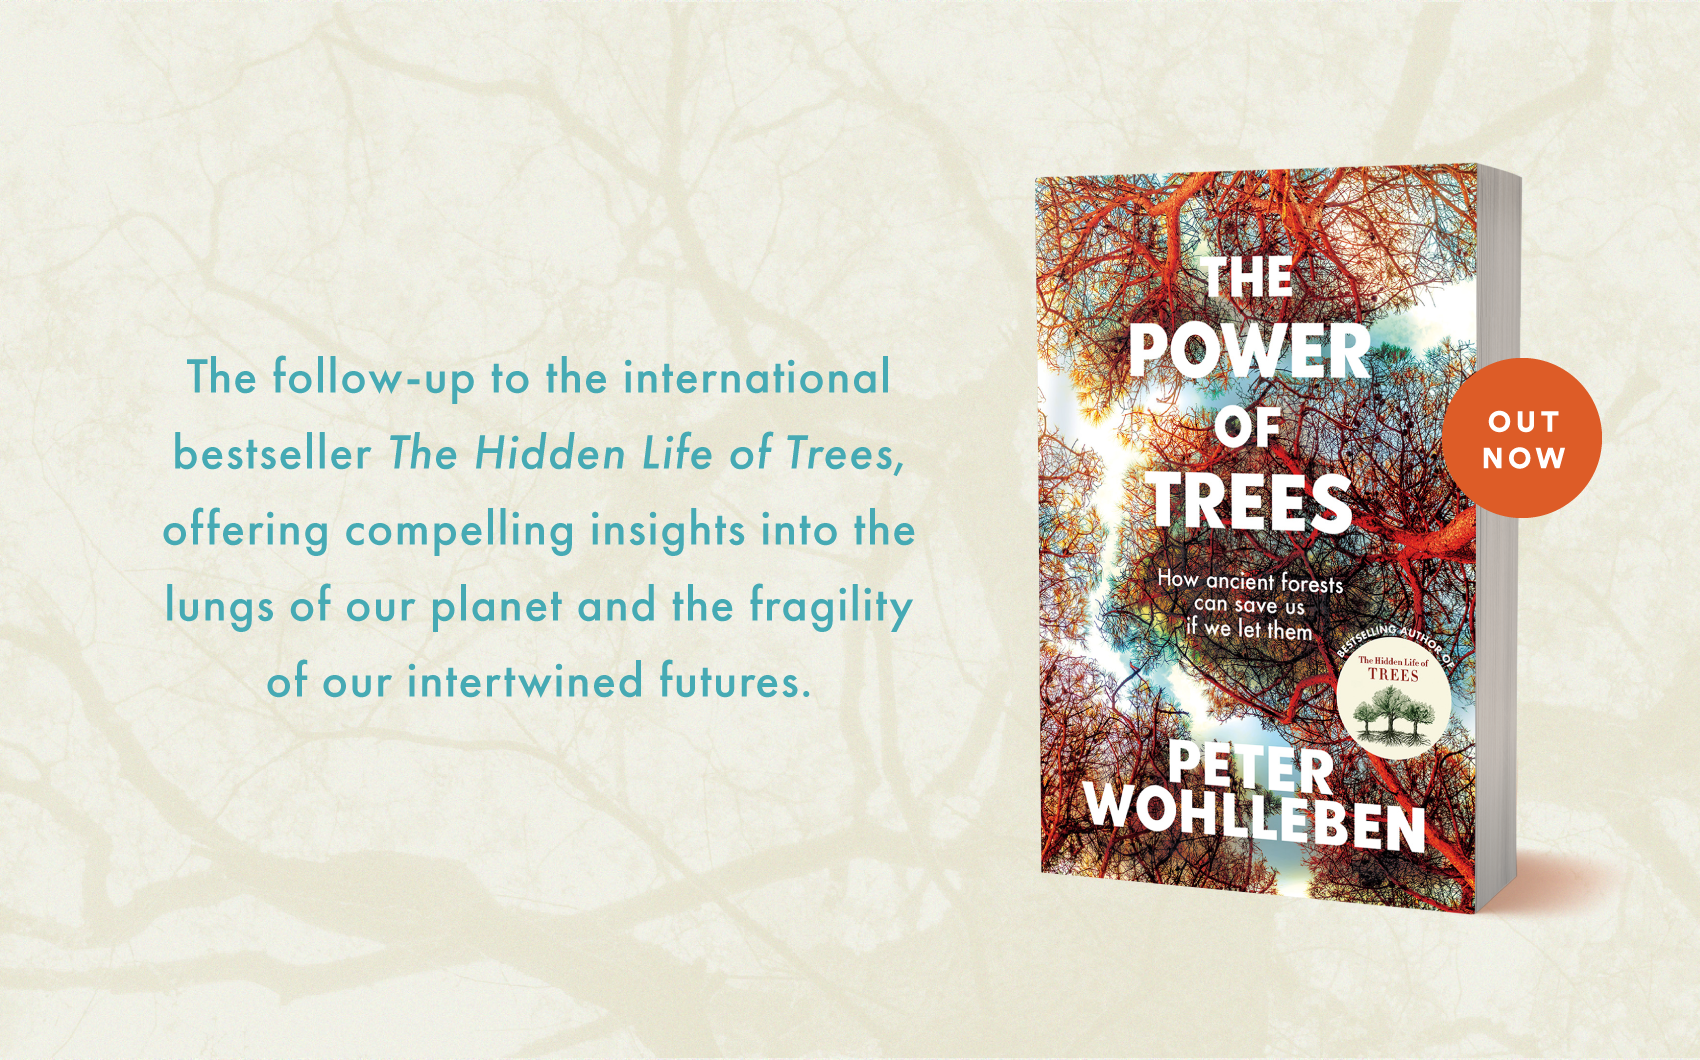 Out now: The Power of Trees